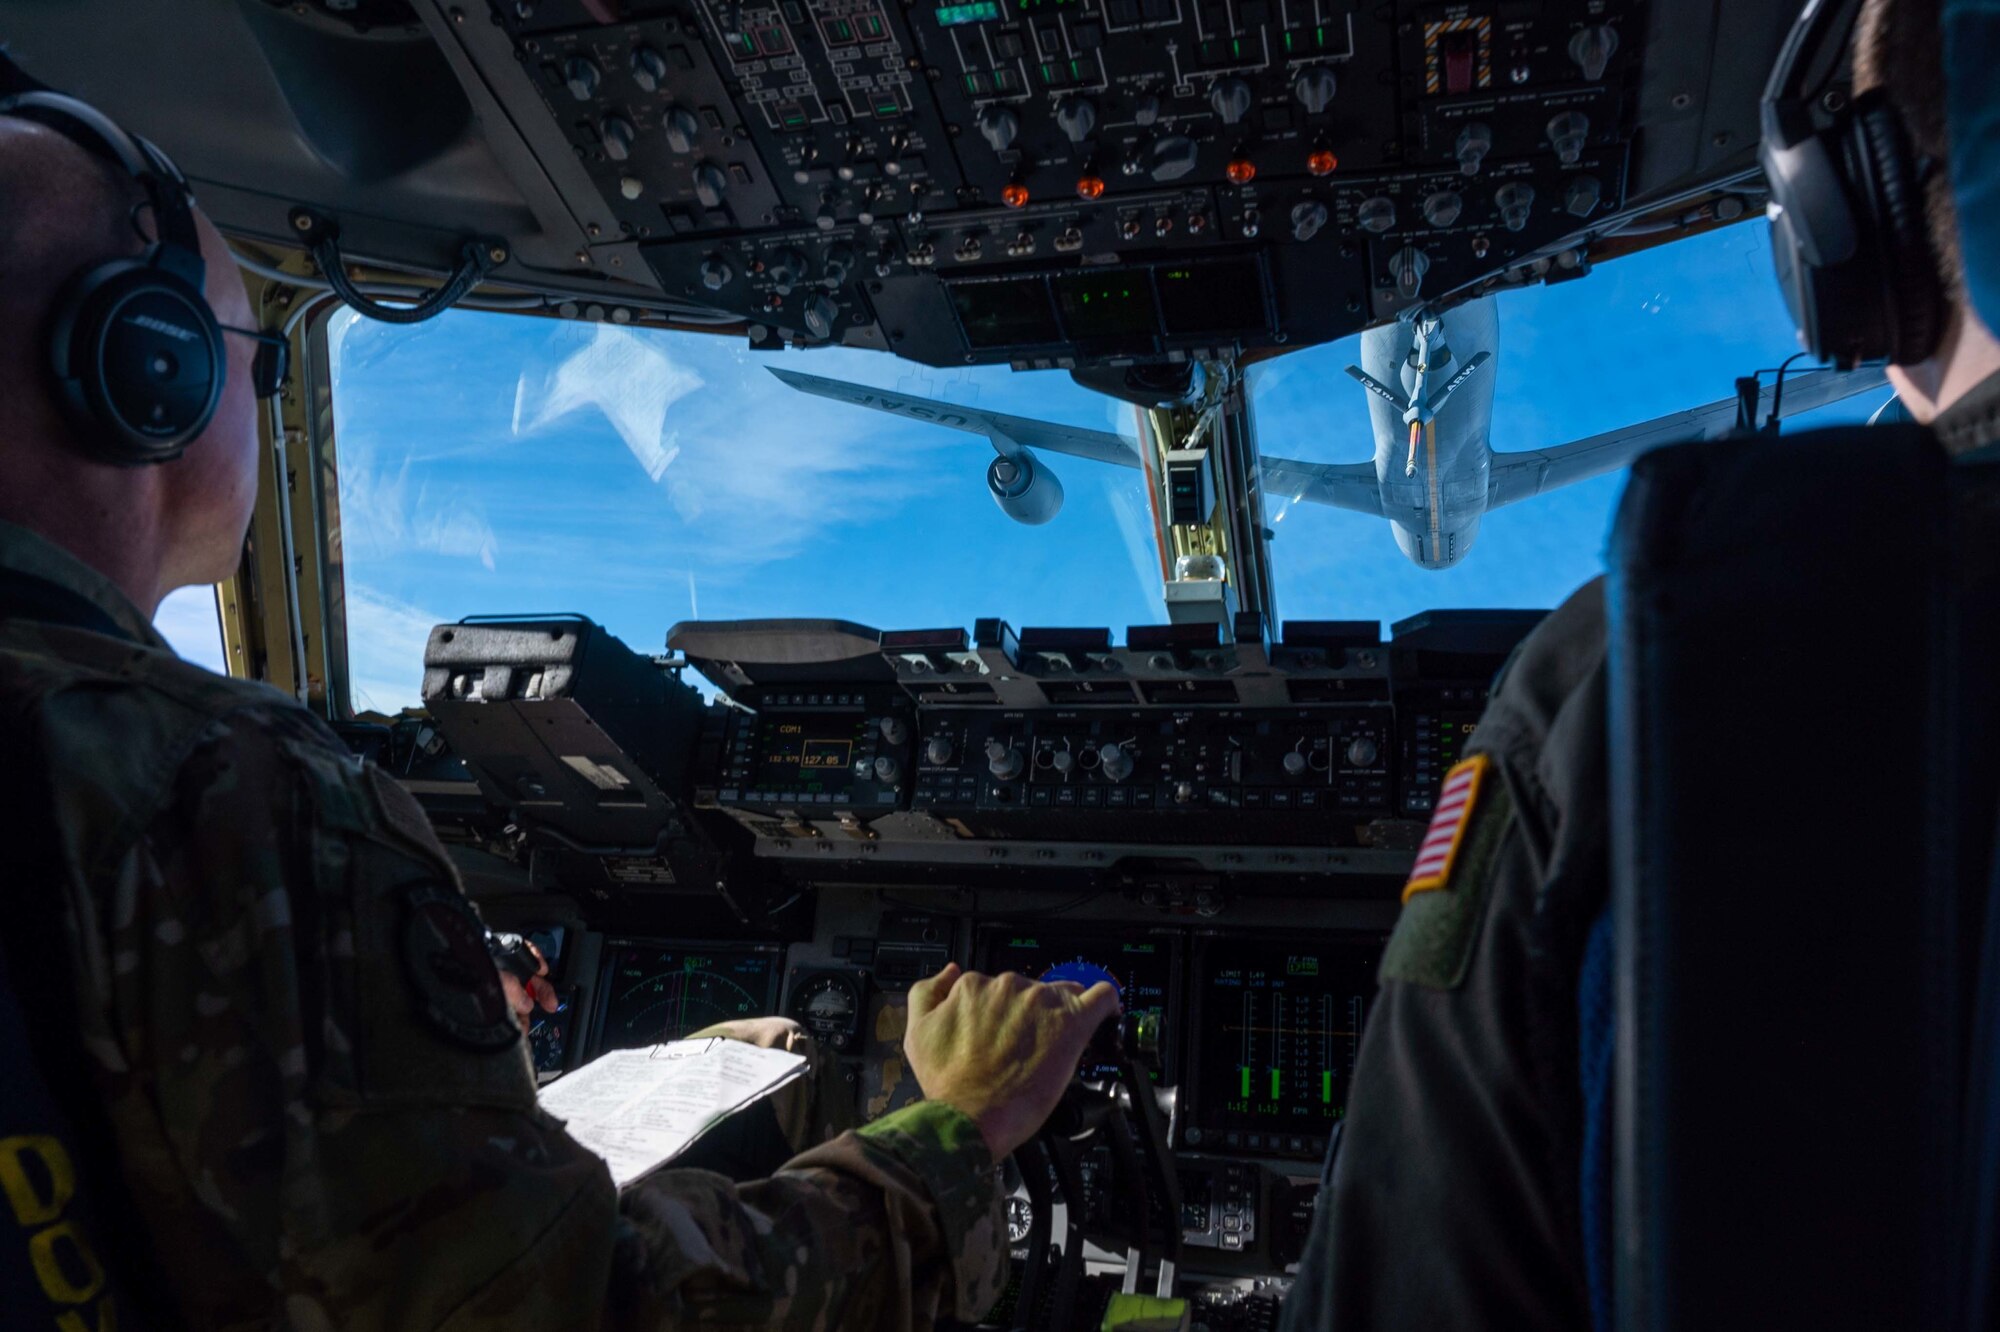 Maj. James Kovarovic, 3rd Airlift Squadron instructor pilot and 1st Lt. Jon Hobb, 3rd Airlift Squadron pilot, pre-position a C-17 Globemaster III for an in-flight refueling with a KC-135 Stratotanker assigned to the 134th Air Refueling Wing, Tennessee Air National Guard on Dec. 10, 2020. The 436th Airlift Wing routinely flies training missions to maintain mission readiness. (U.S. Air Force photo by Airman 1st Class Faith Schaefer)